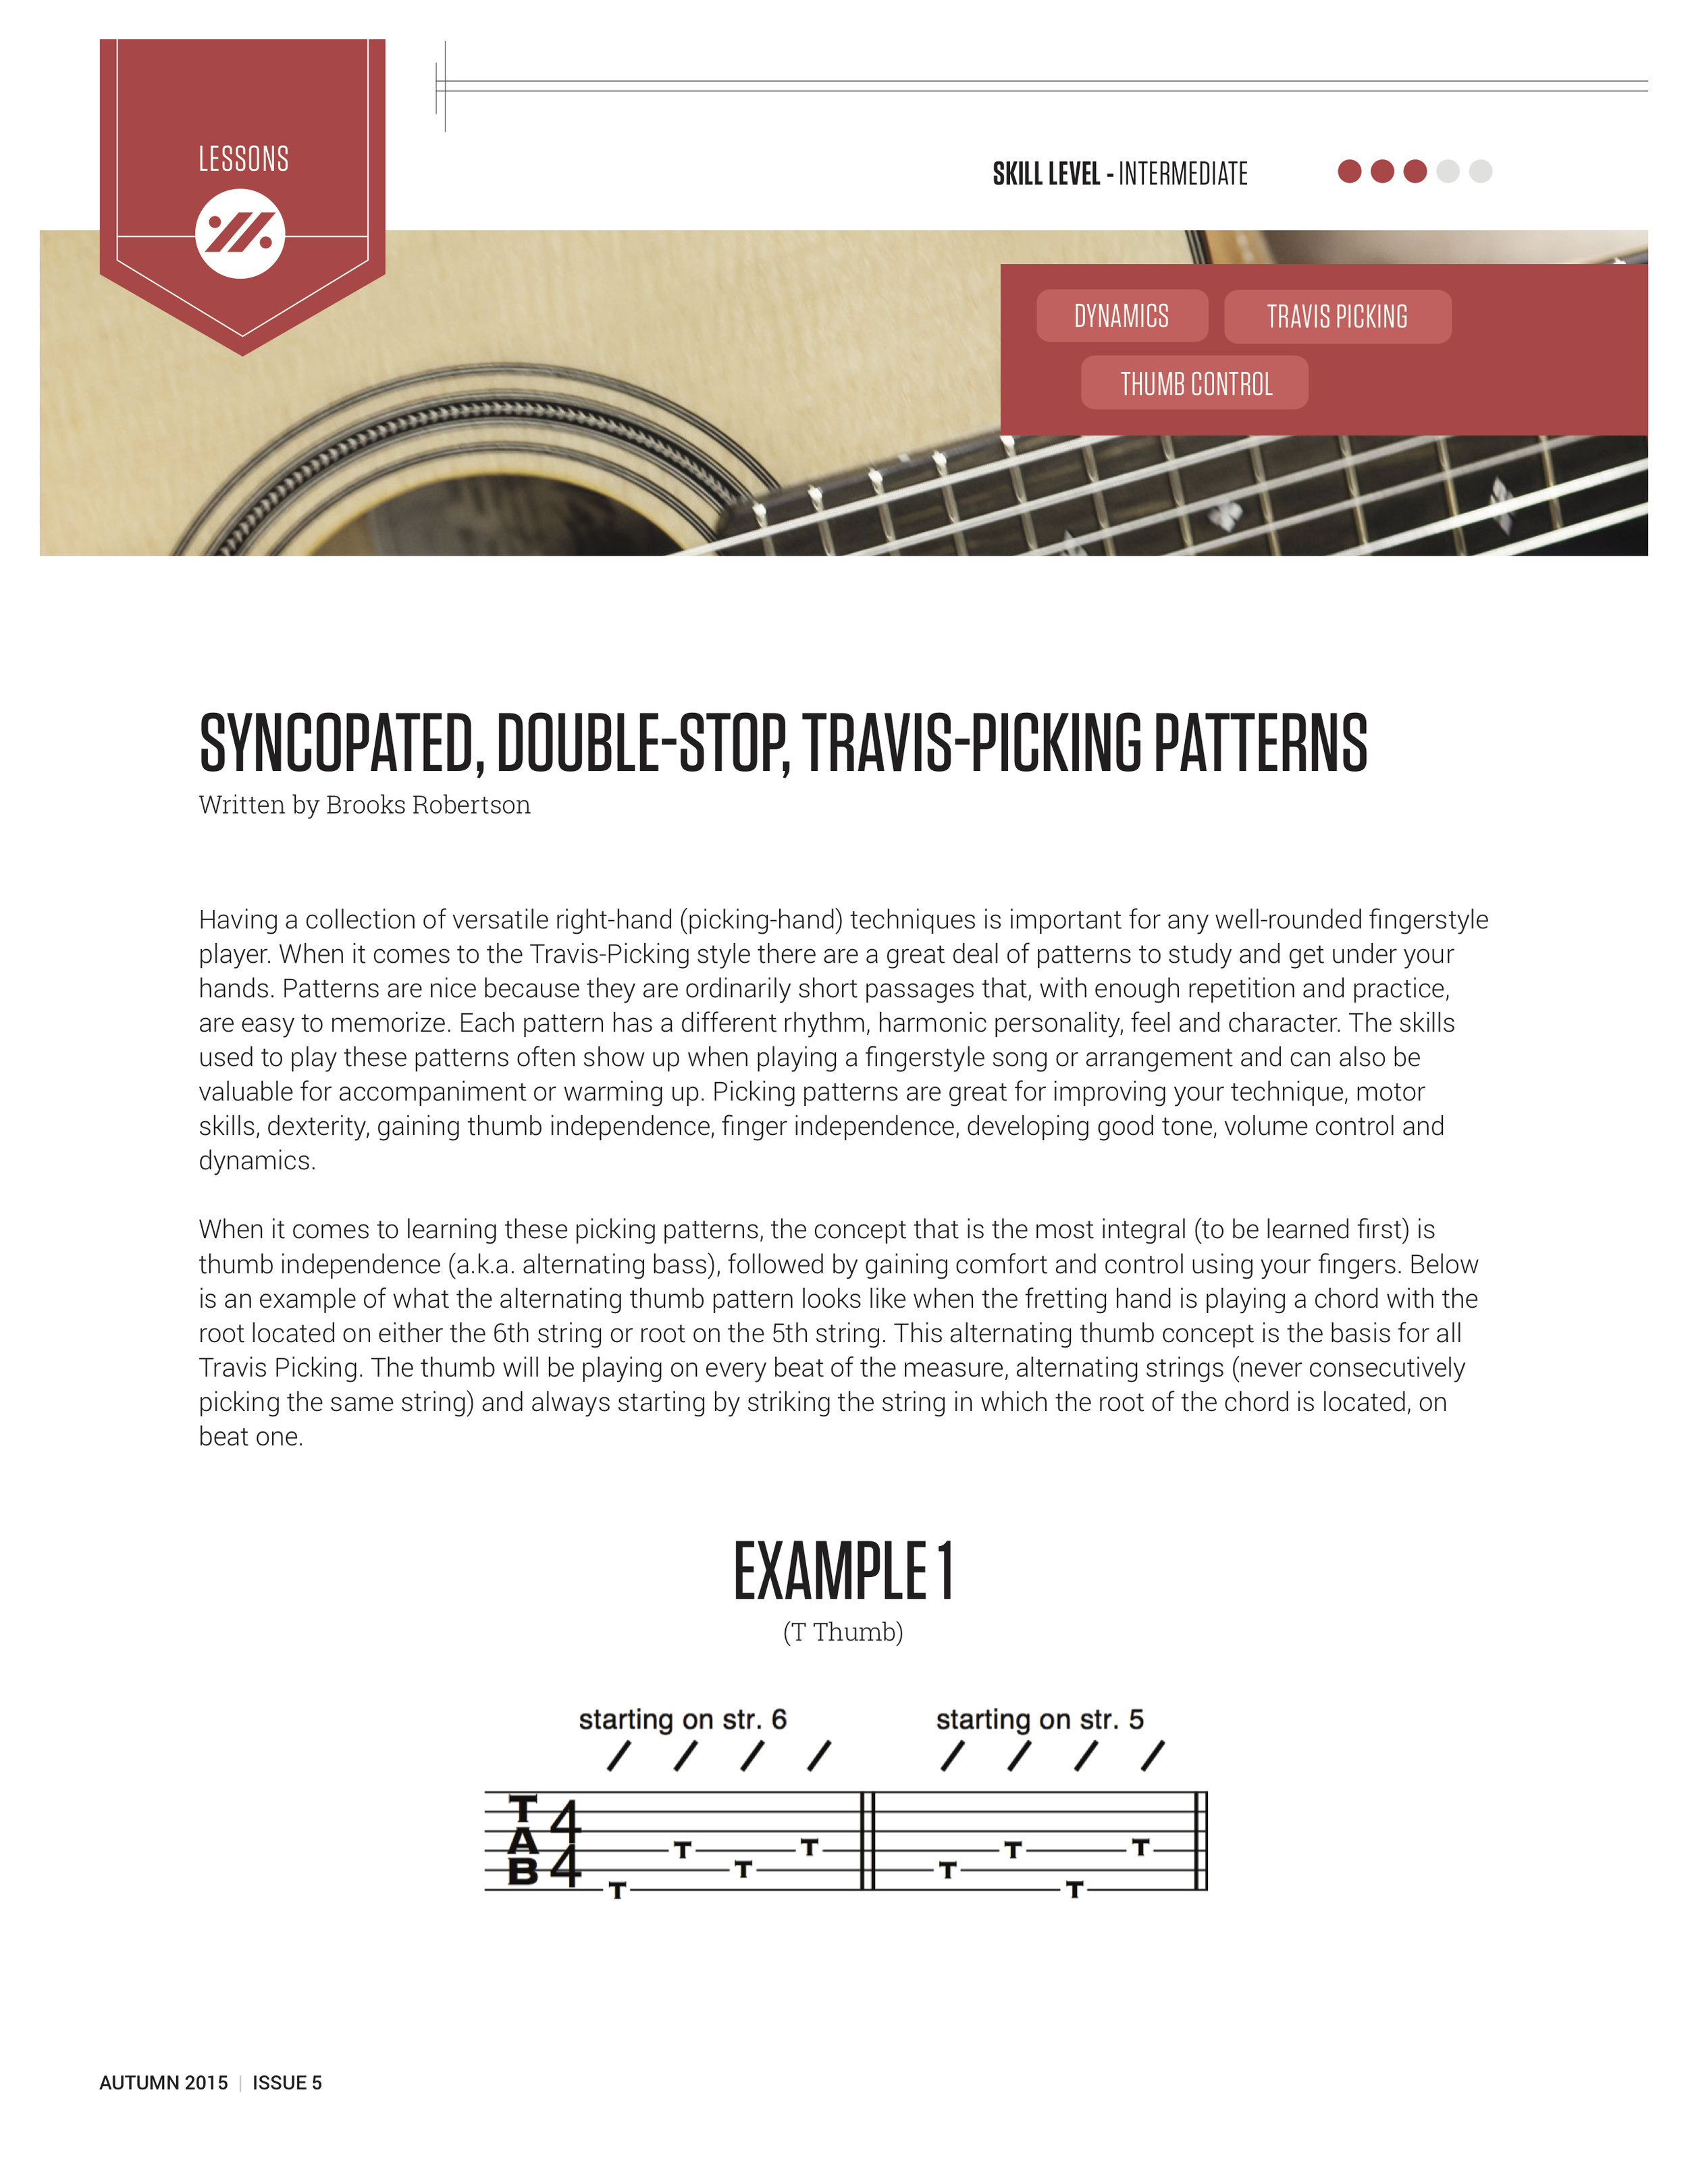 Double Stop Picking Patterns Article RIFF.jpg